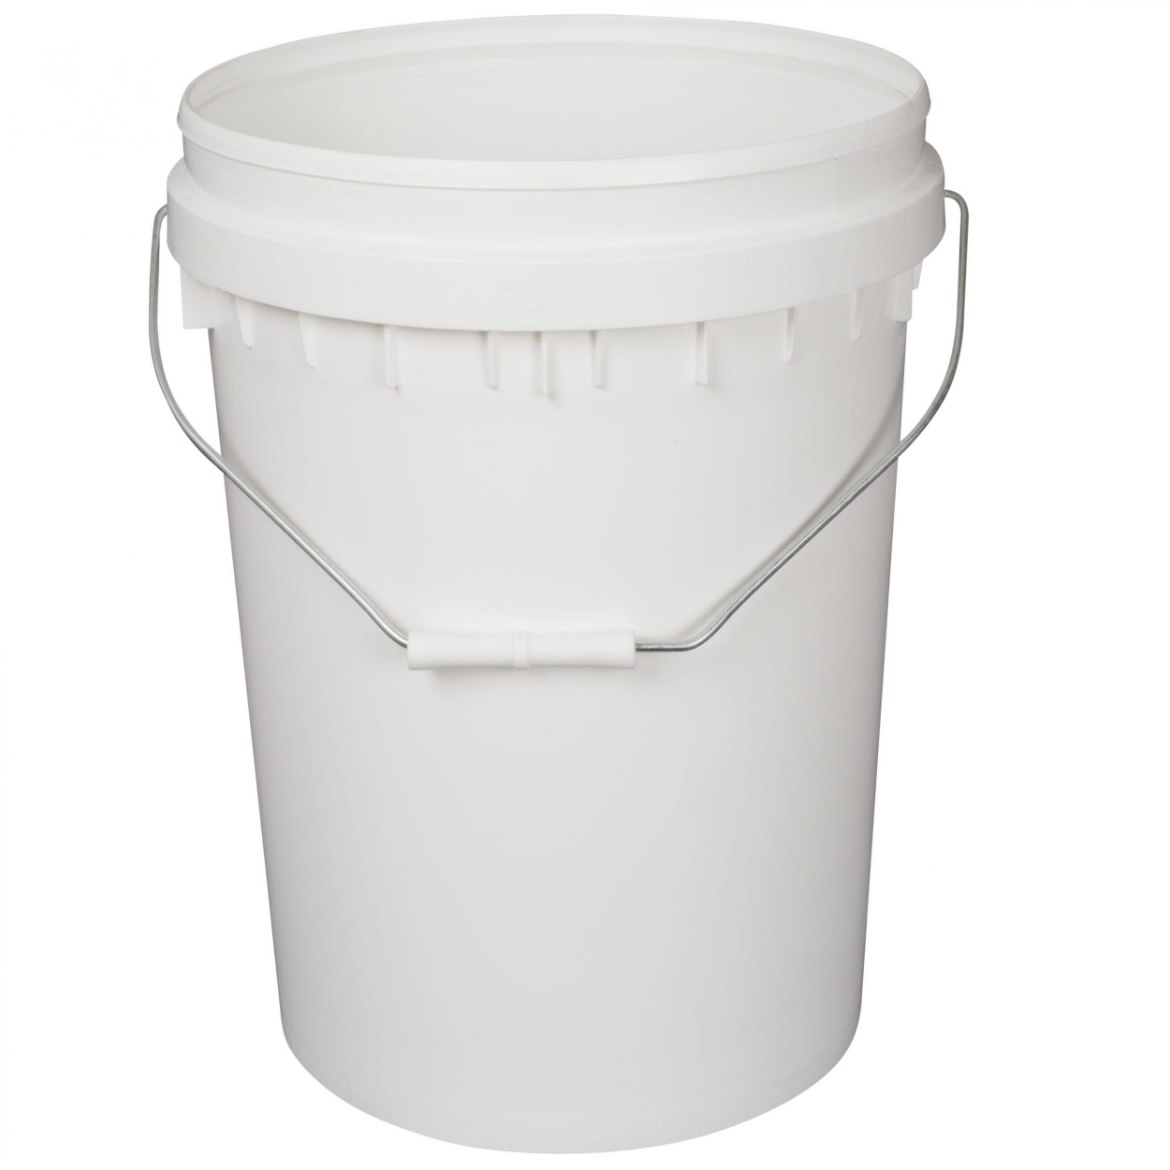 Picture of Bucket Plastic 20L White + Lid